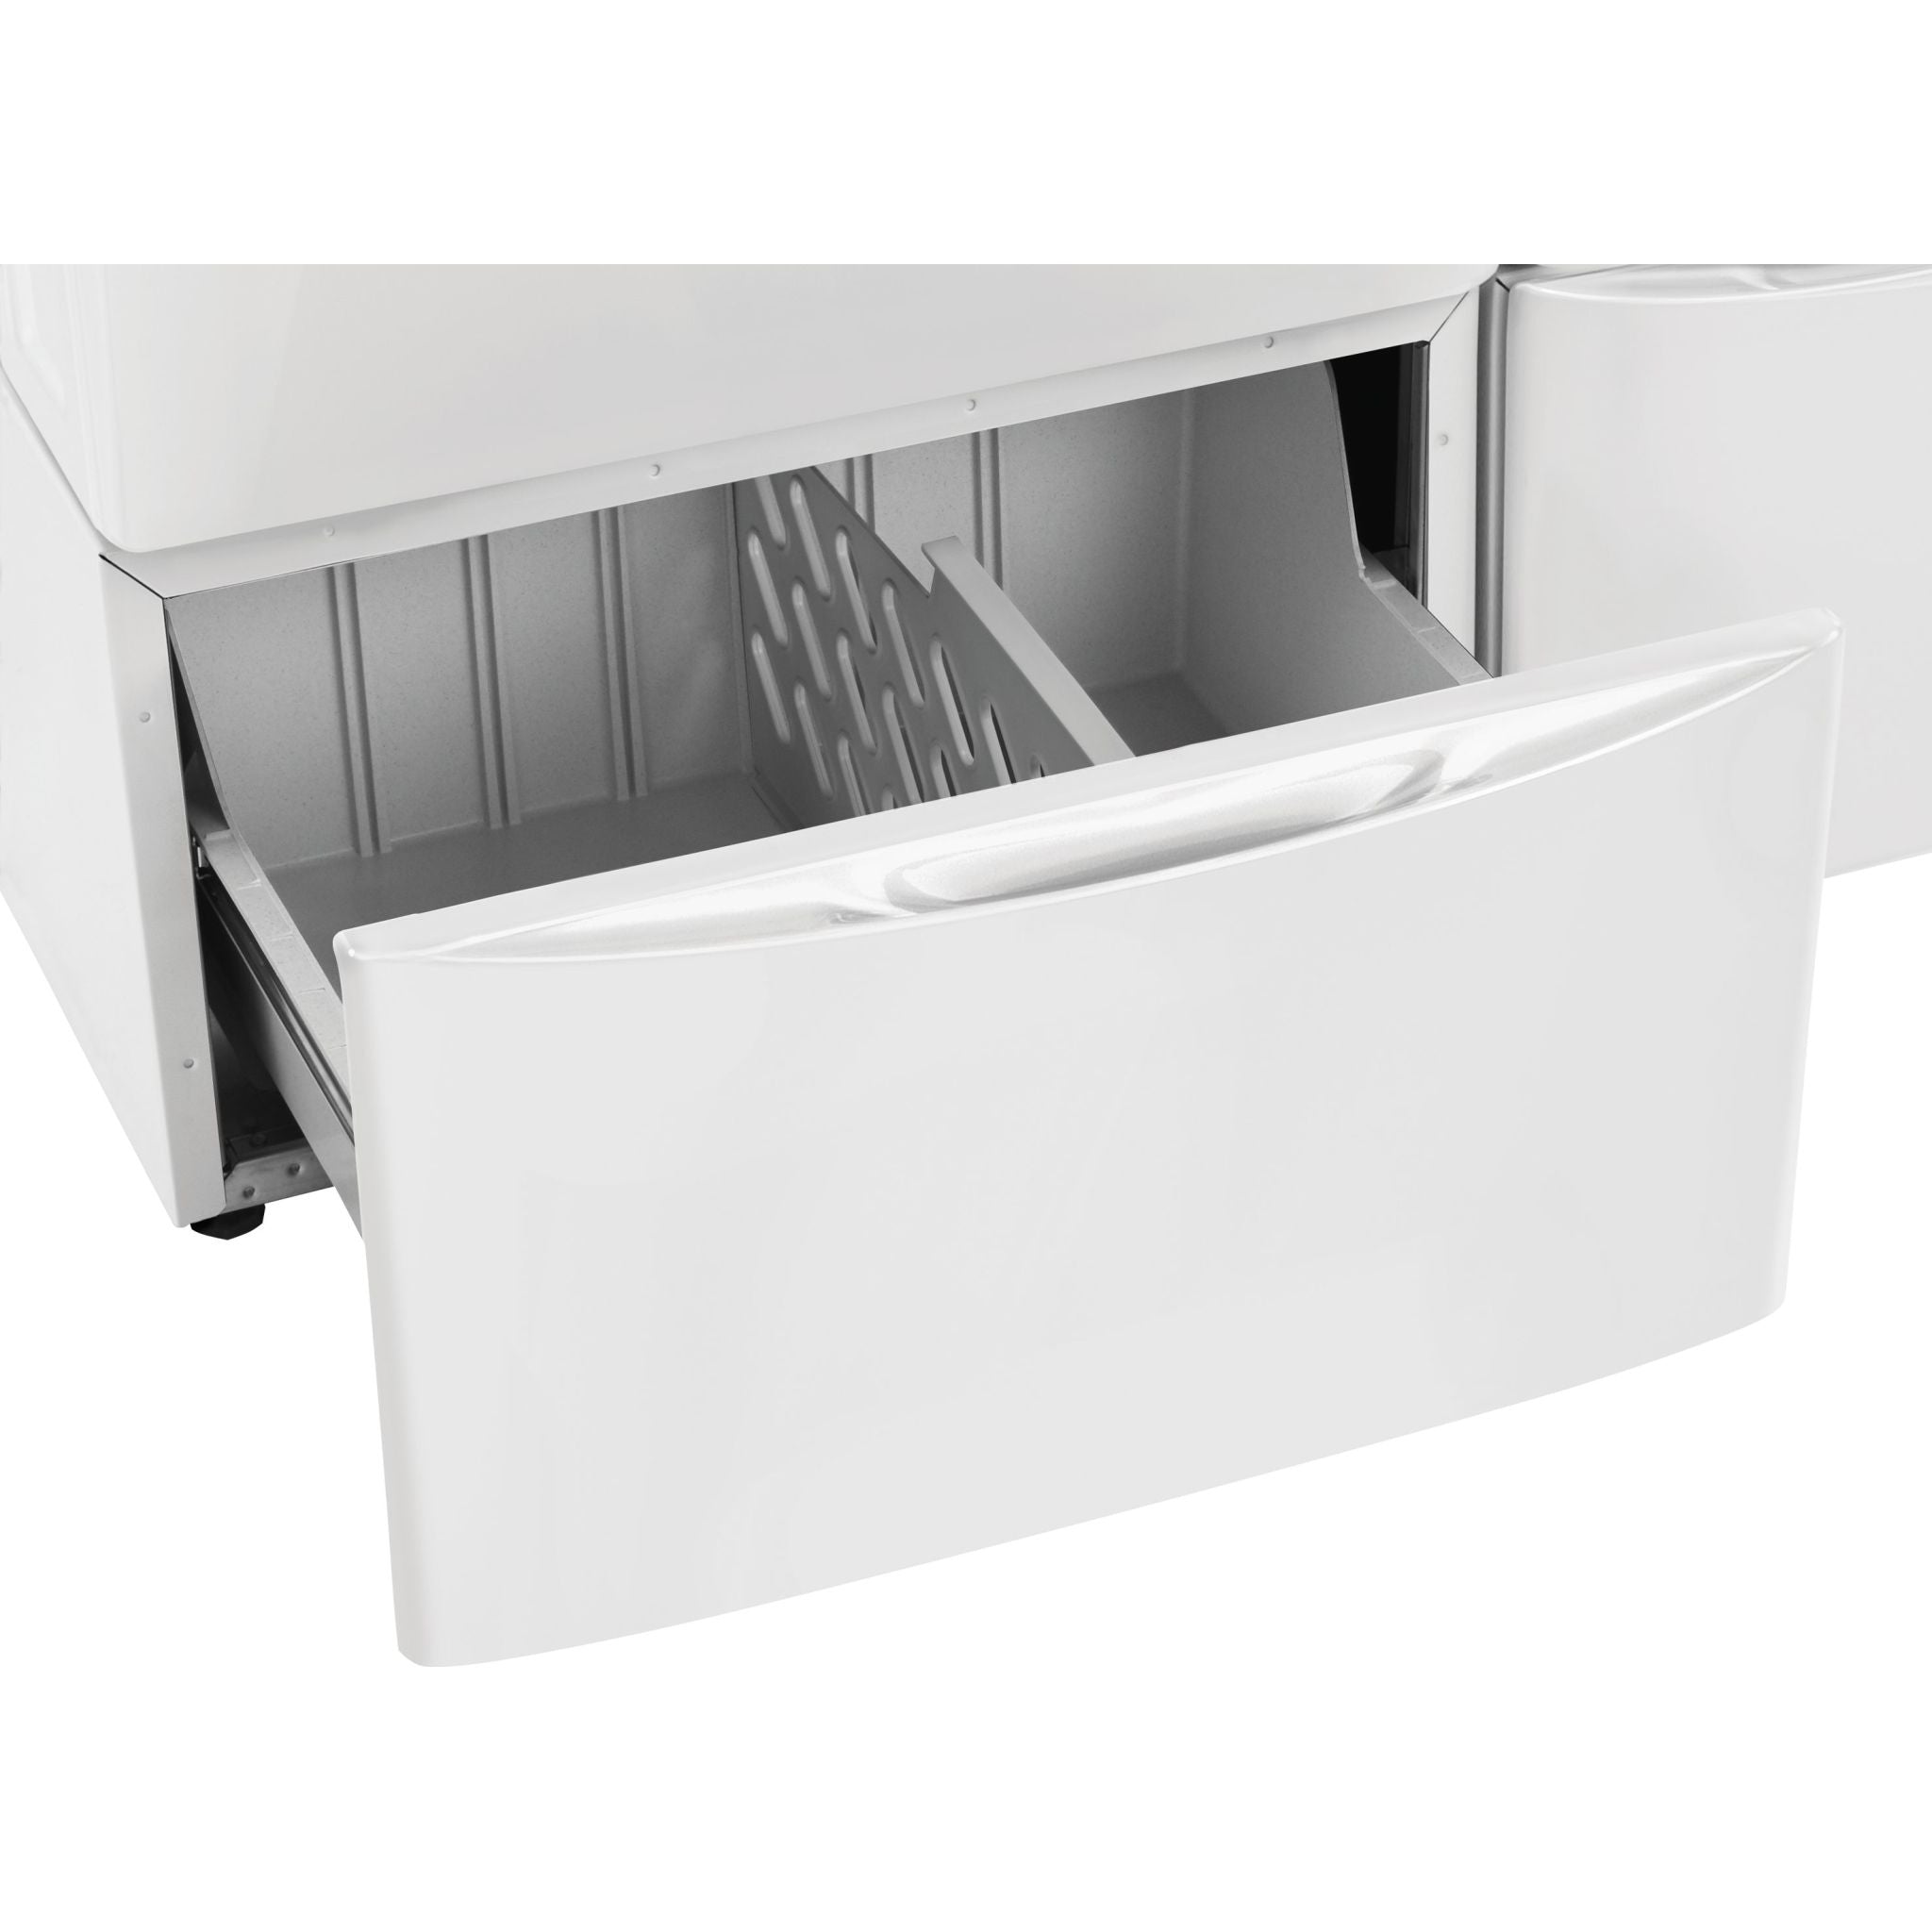 Electrolux Home Products, Electrolux Pedestal Drawer (EPWD257UIW)